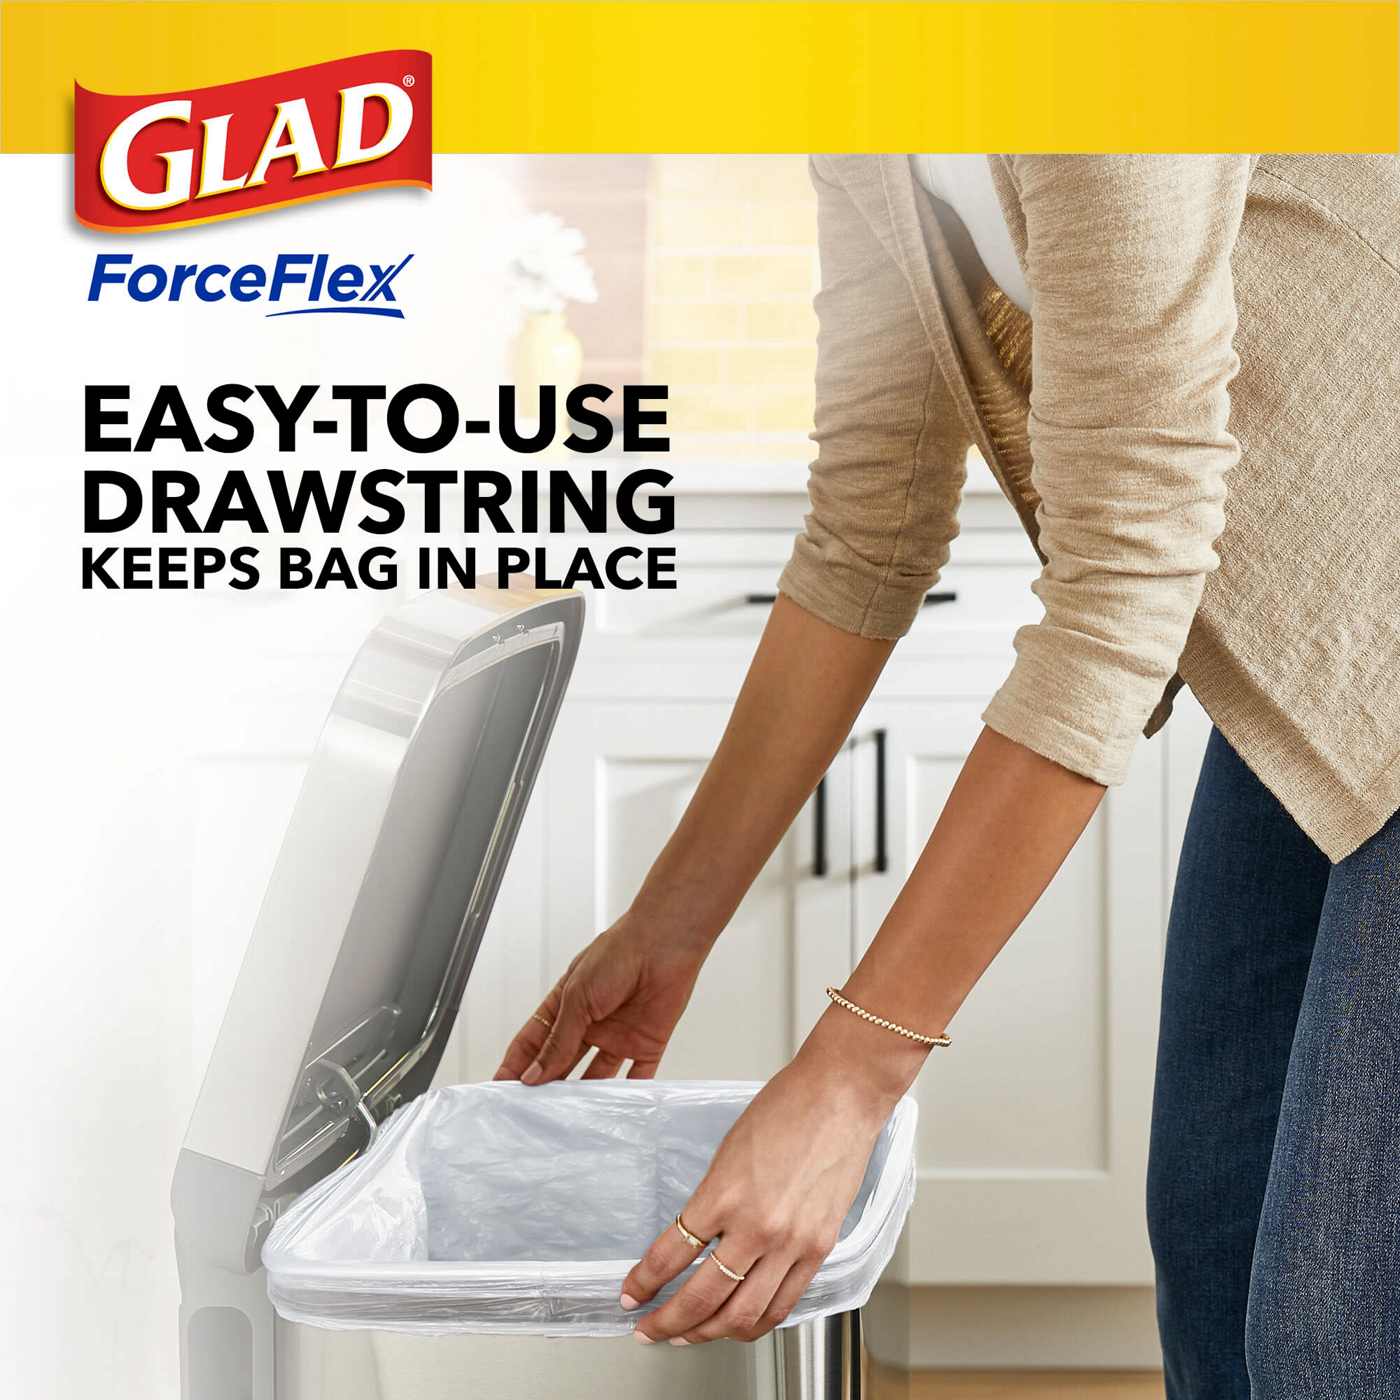 Glad ForceFlex Tall Kitchen Drawstring Trash Bags, 13 Gallon - Gain Original Scent with Febreeze Freshness; image 7 of 9